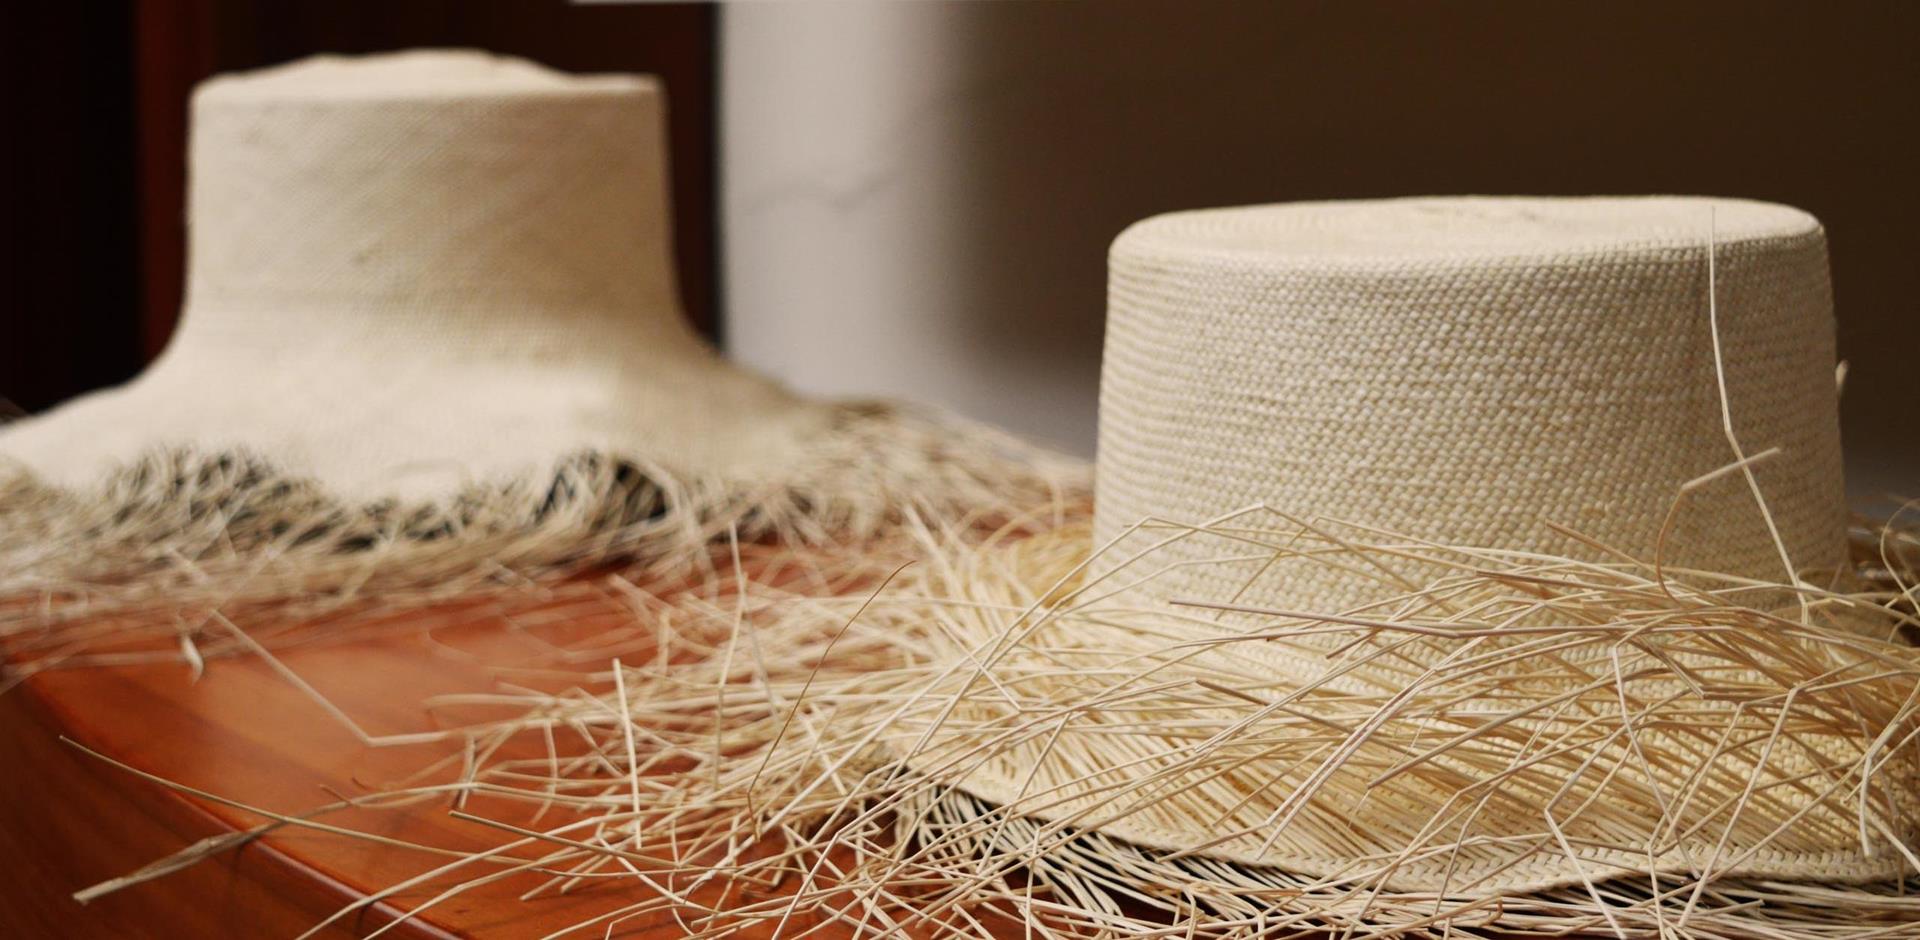 Make your own Panama hat